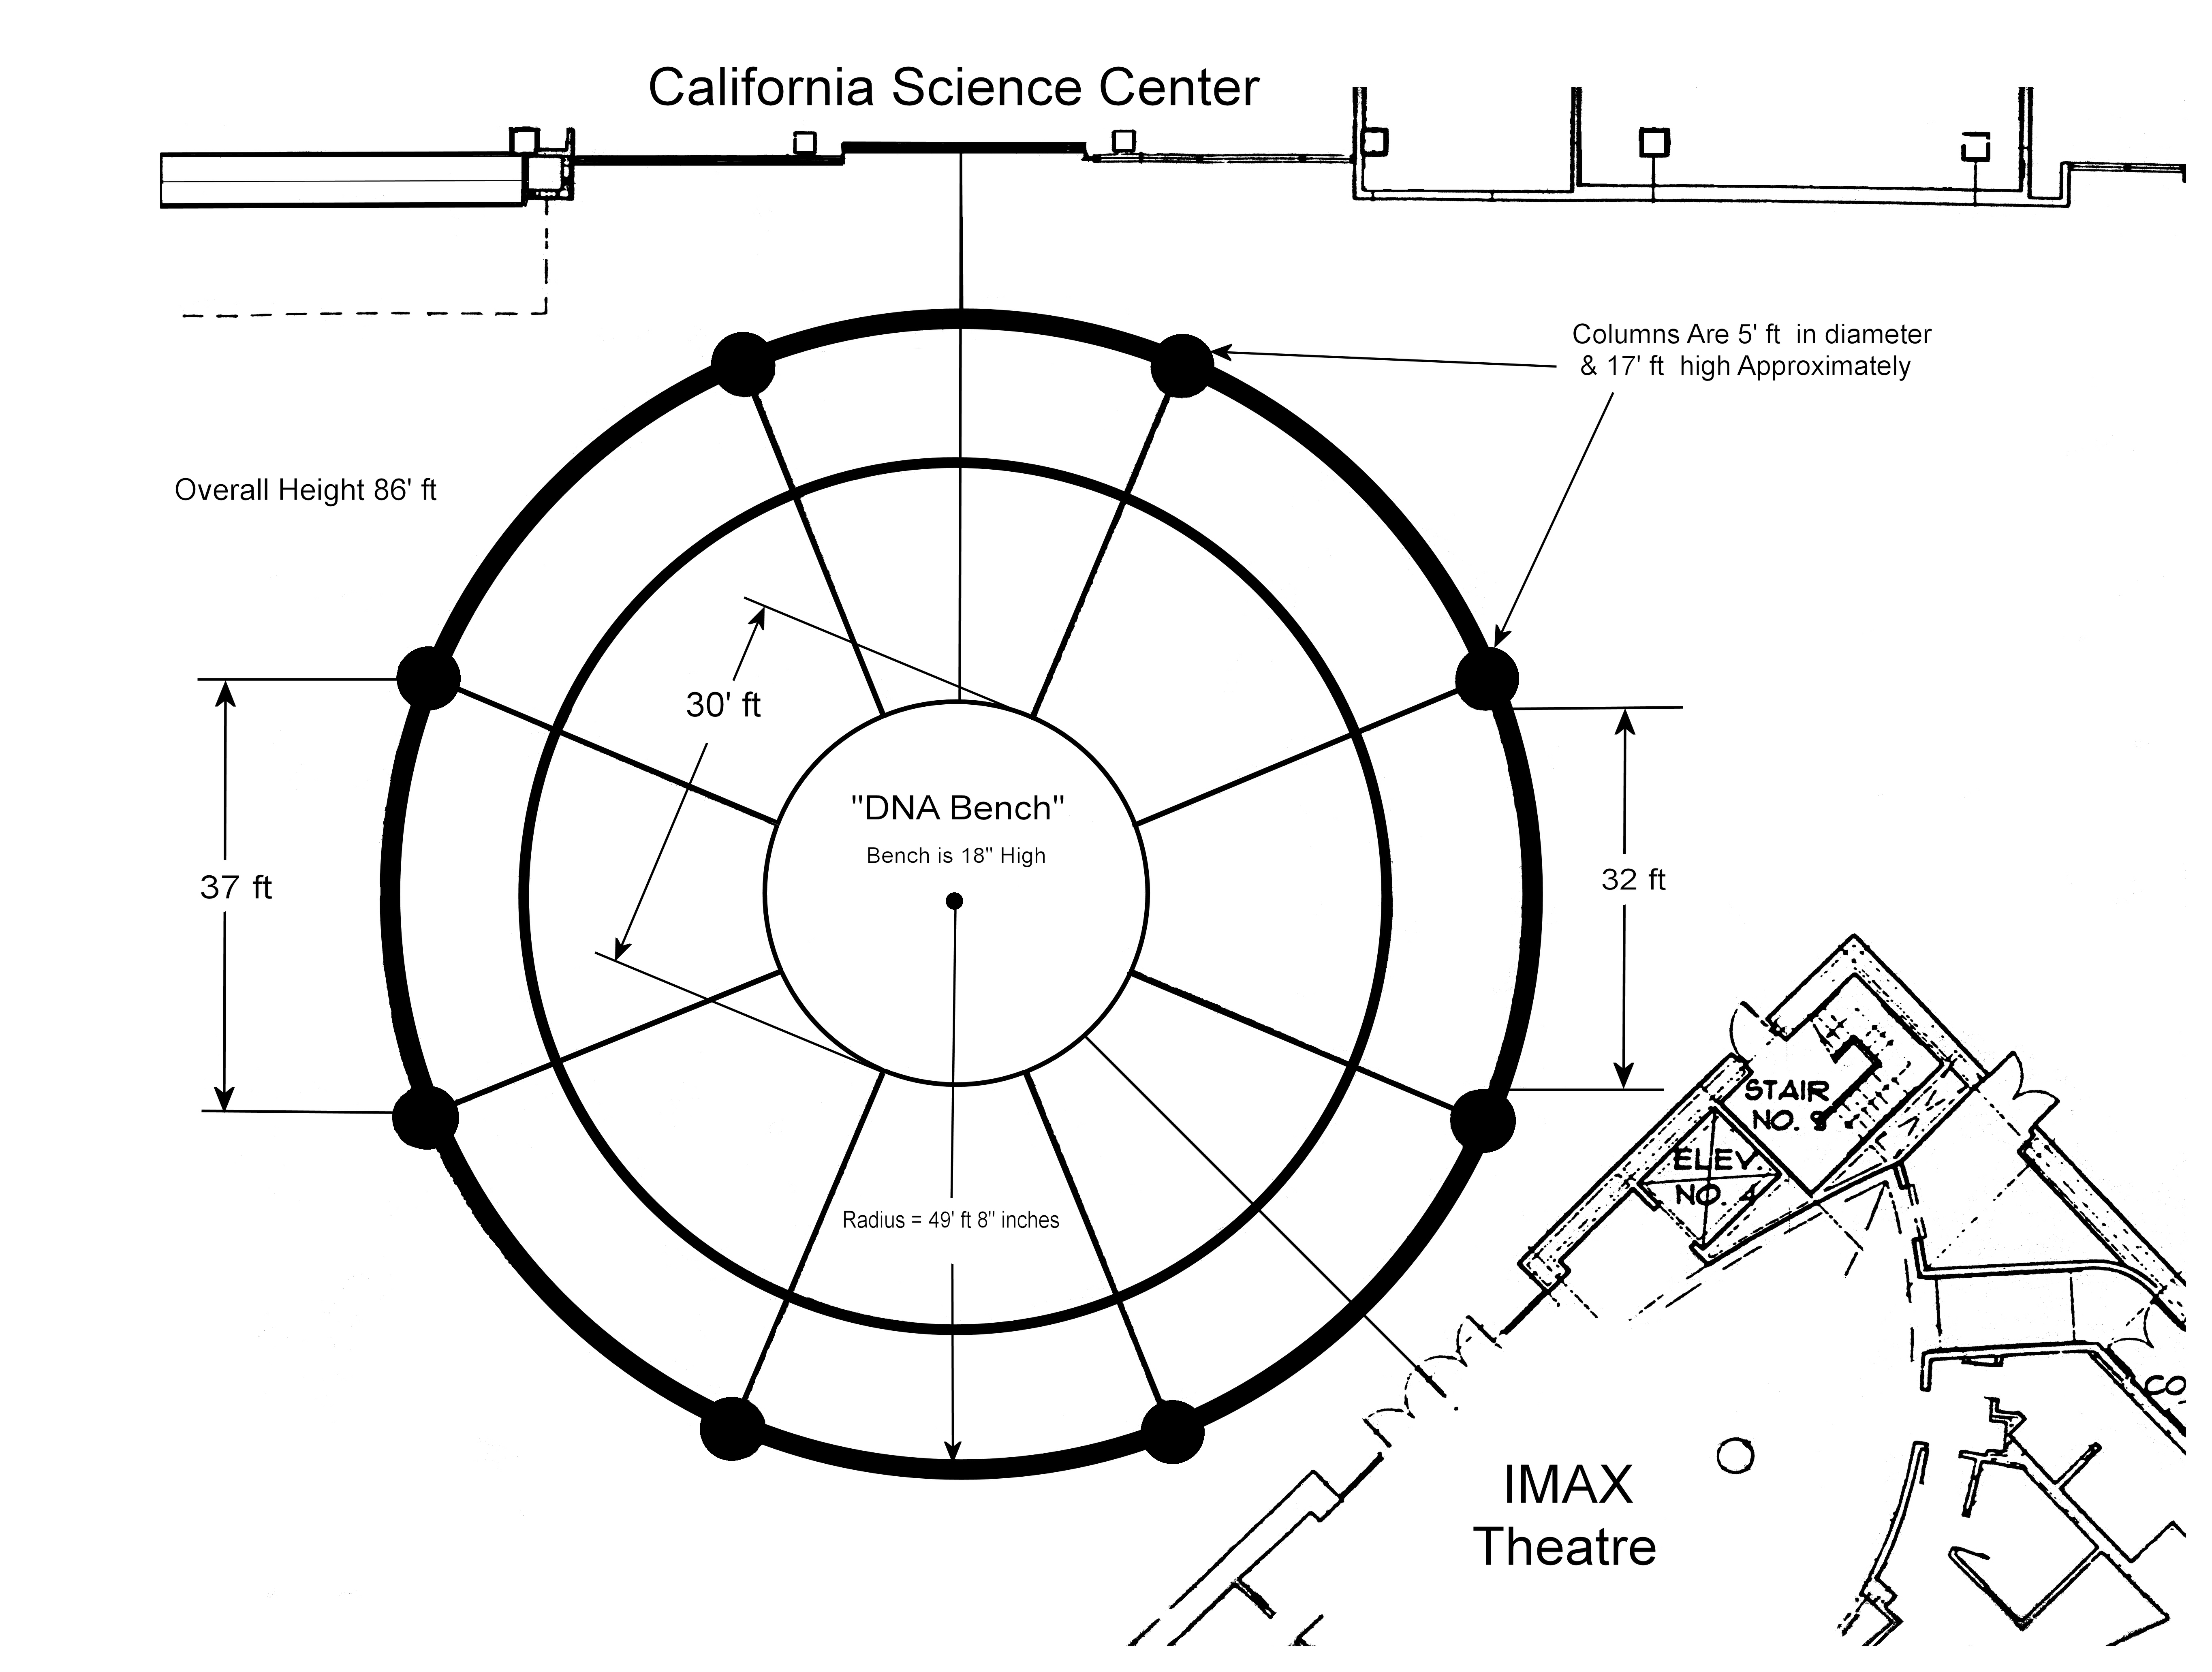 Blank venue diagram of the Lorsch Family Pavilion including DNA bench, IMAX Theatre, and California Science Center labels as well as measurements